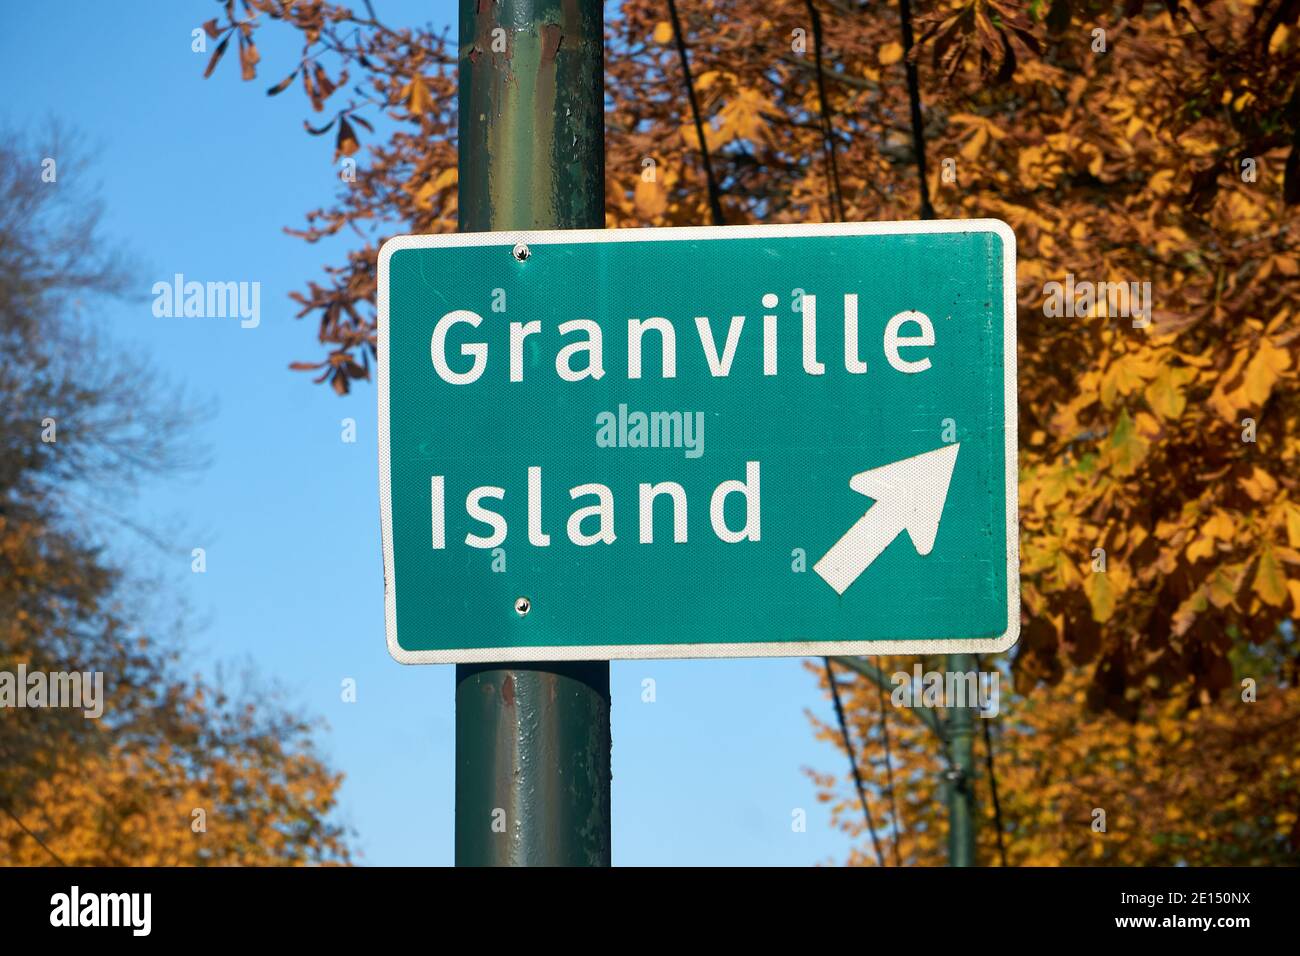 Road sign with arrow pointing direction to to Granville Island in Vancouver, British Columbia, Canada Stock Photo